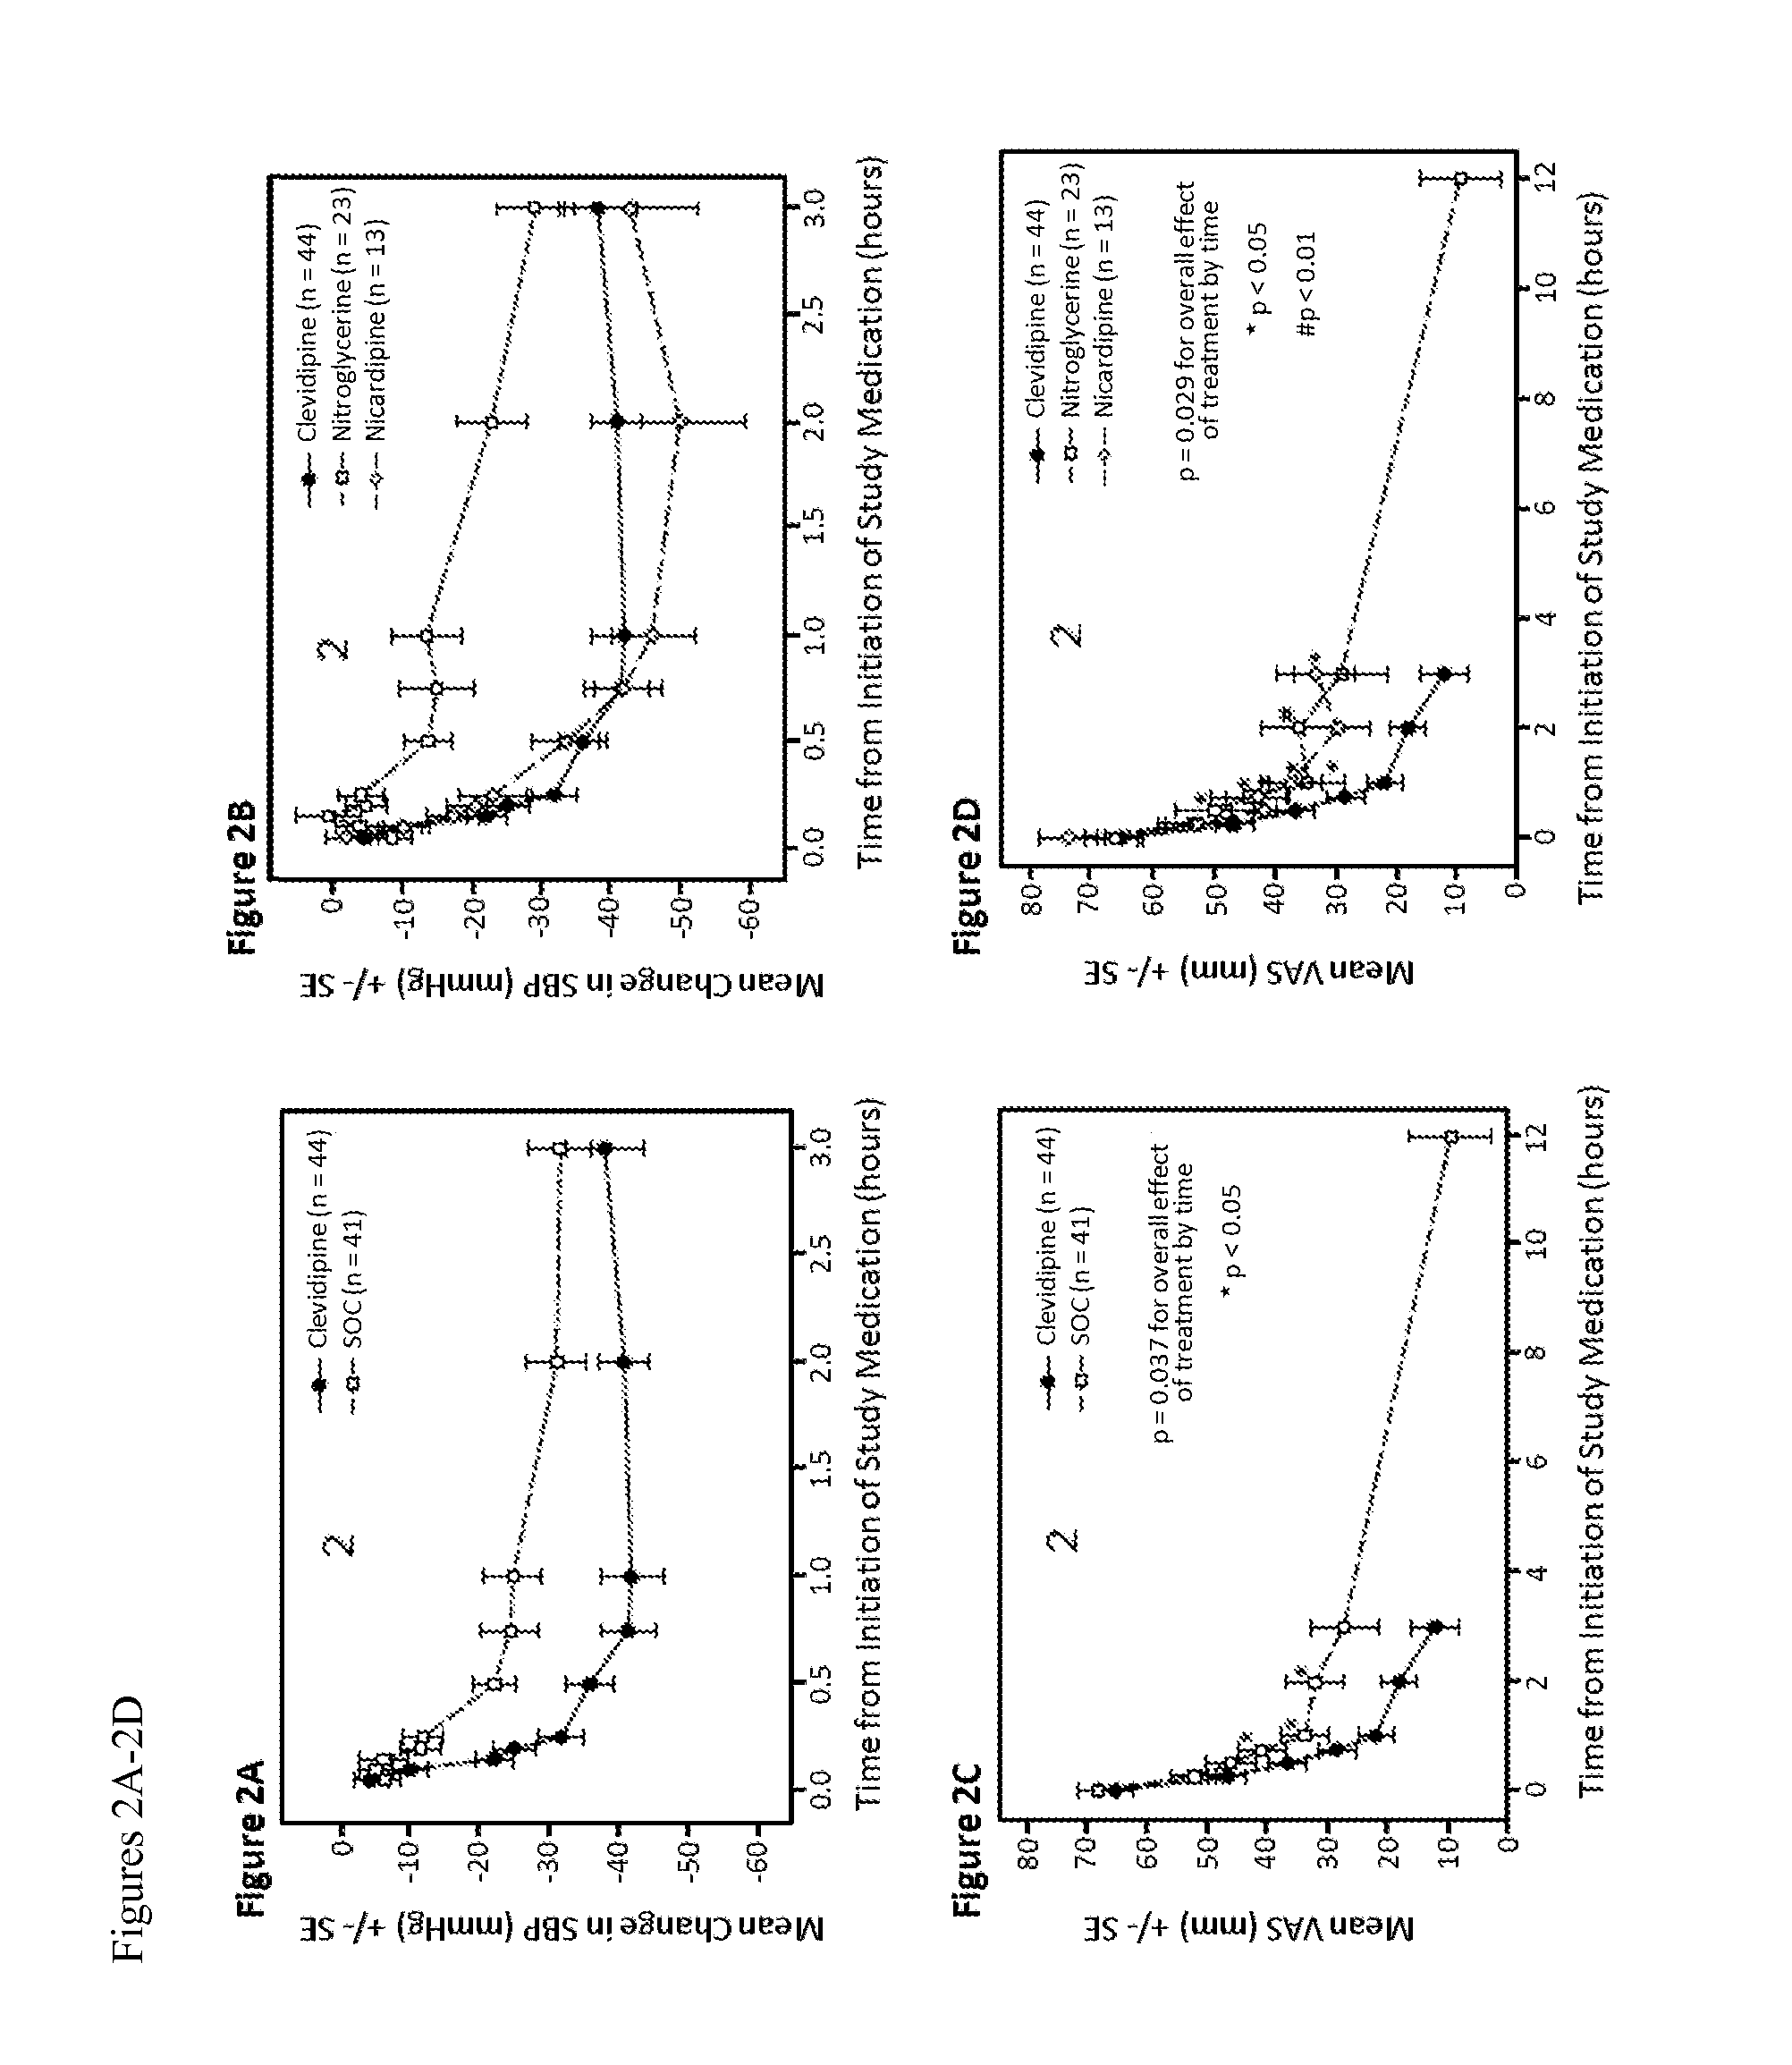 Methods for Controlling Blood Pressure and Reducing Dyspnea in Heart Failure